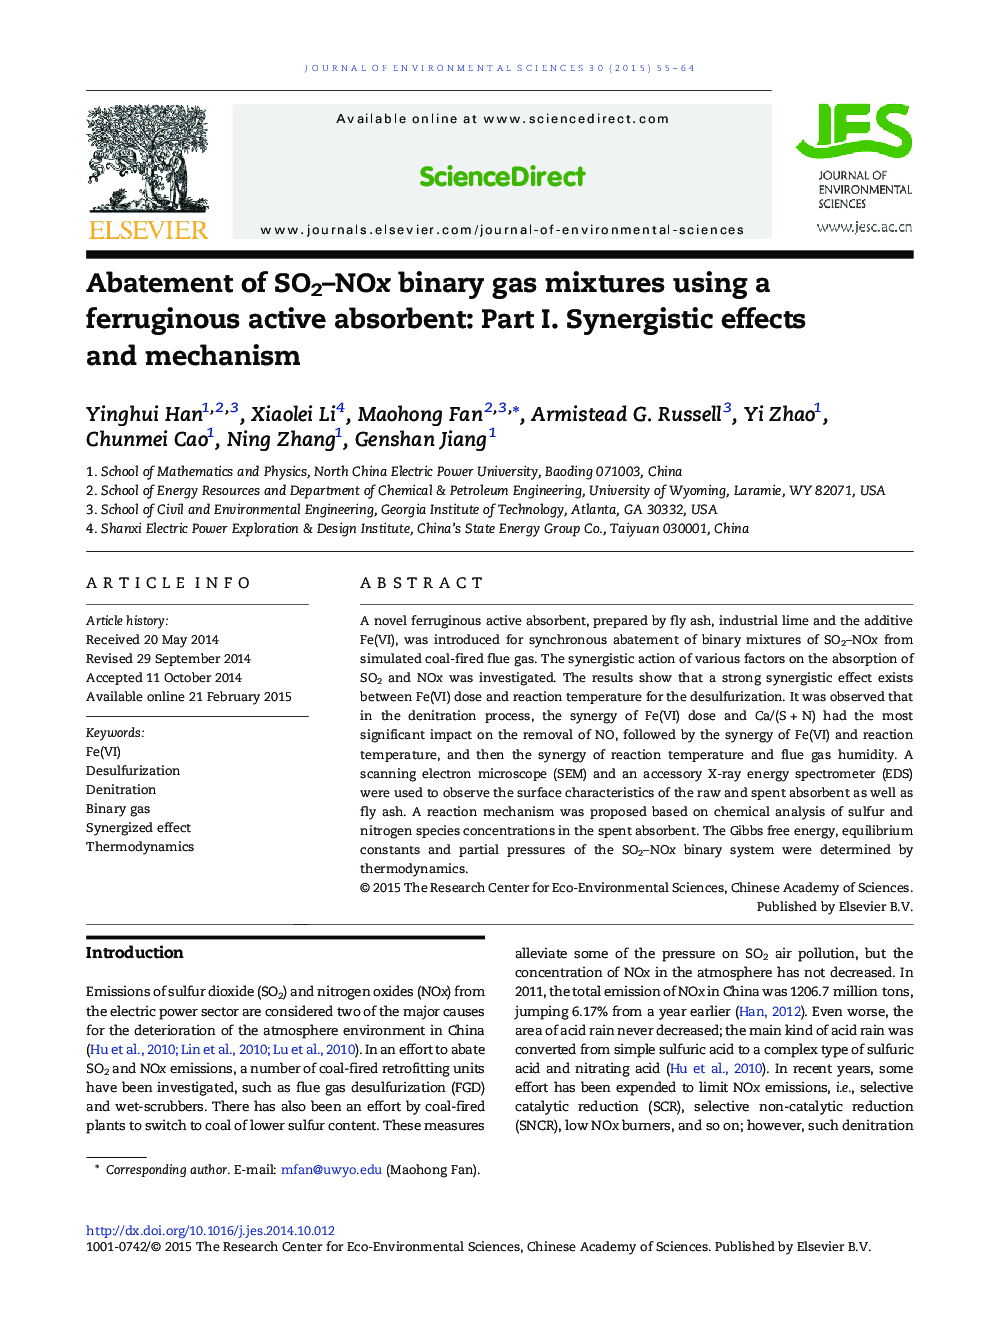 Abatement of SO2–NOx binary gas mixtures using a ferruginous active absorbent: Part I. Synergistic effects and mechanism